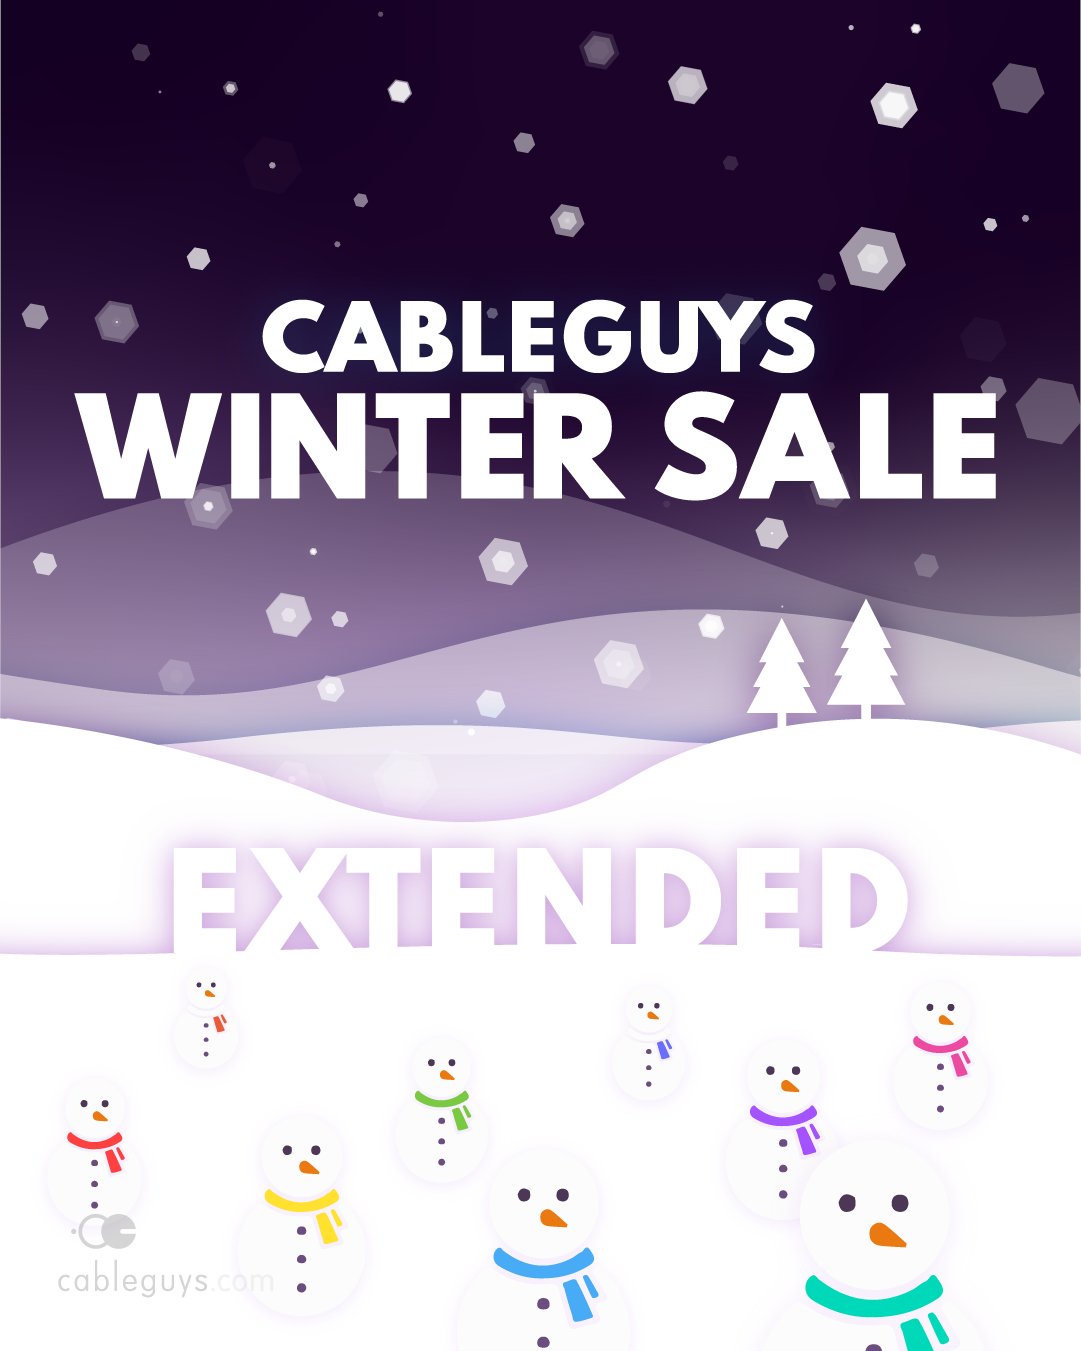 Cableguys (@CableguysTweets) / X